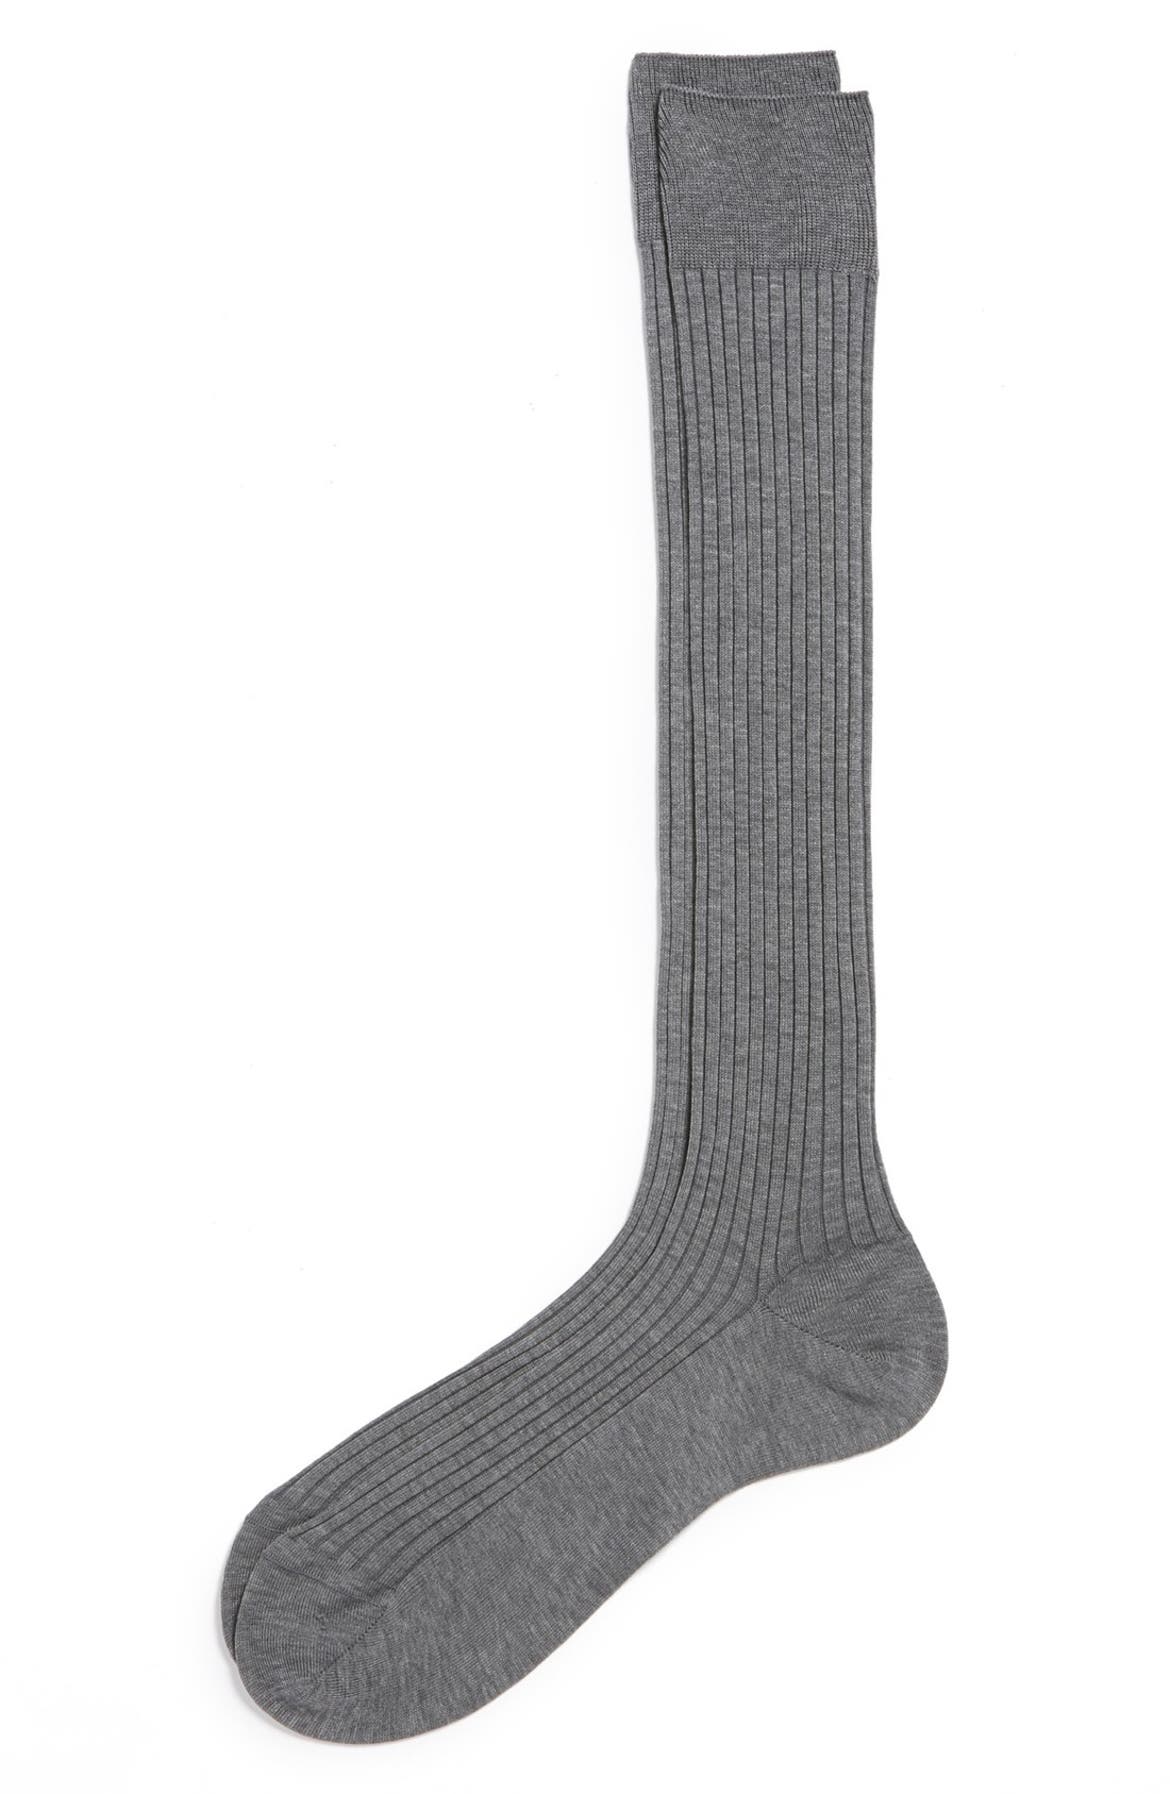 Pantherella Cotton Lisle Blend Over the Calf Socks | Nordstrom